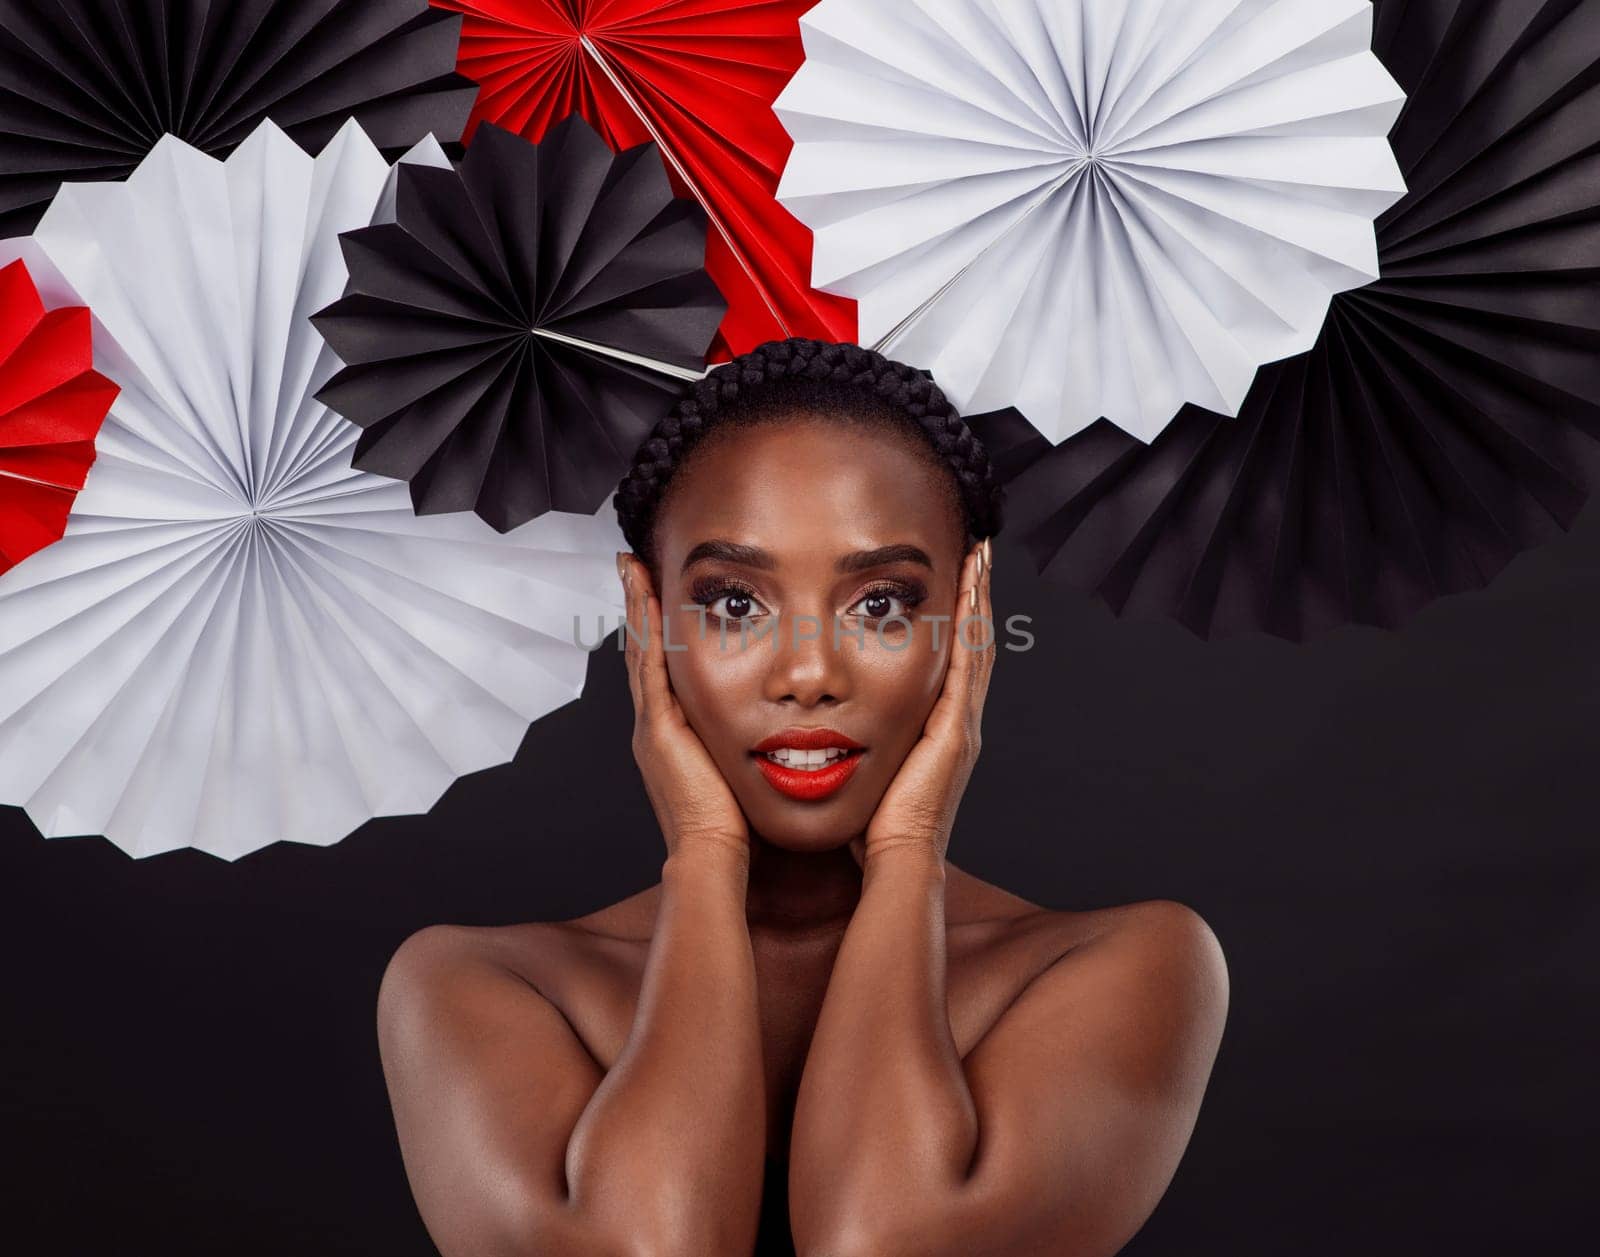 Female person, portrait and origami on hair in studio background for fashion with makeup, art and decor. African woman, artist and glamour for creativity, beauty or design with pride or confidence by YuriArcurs